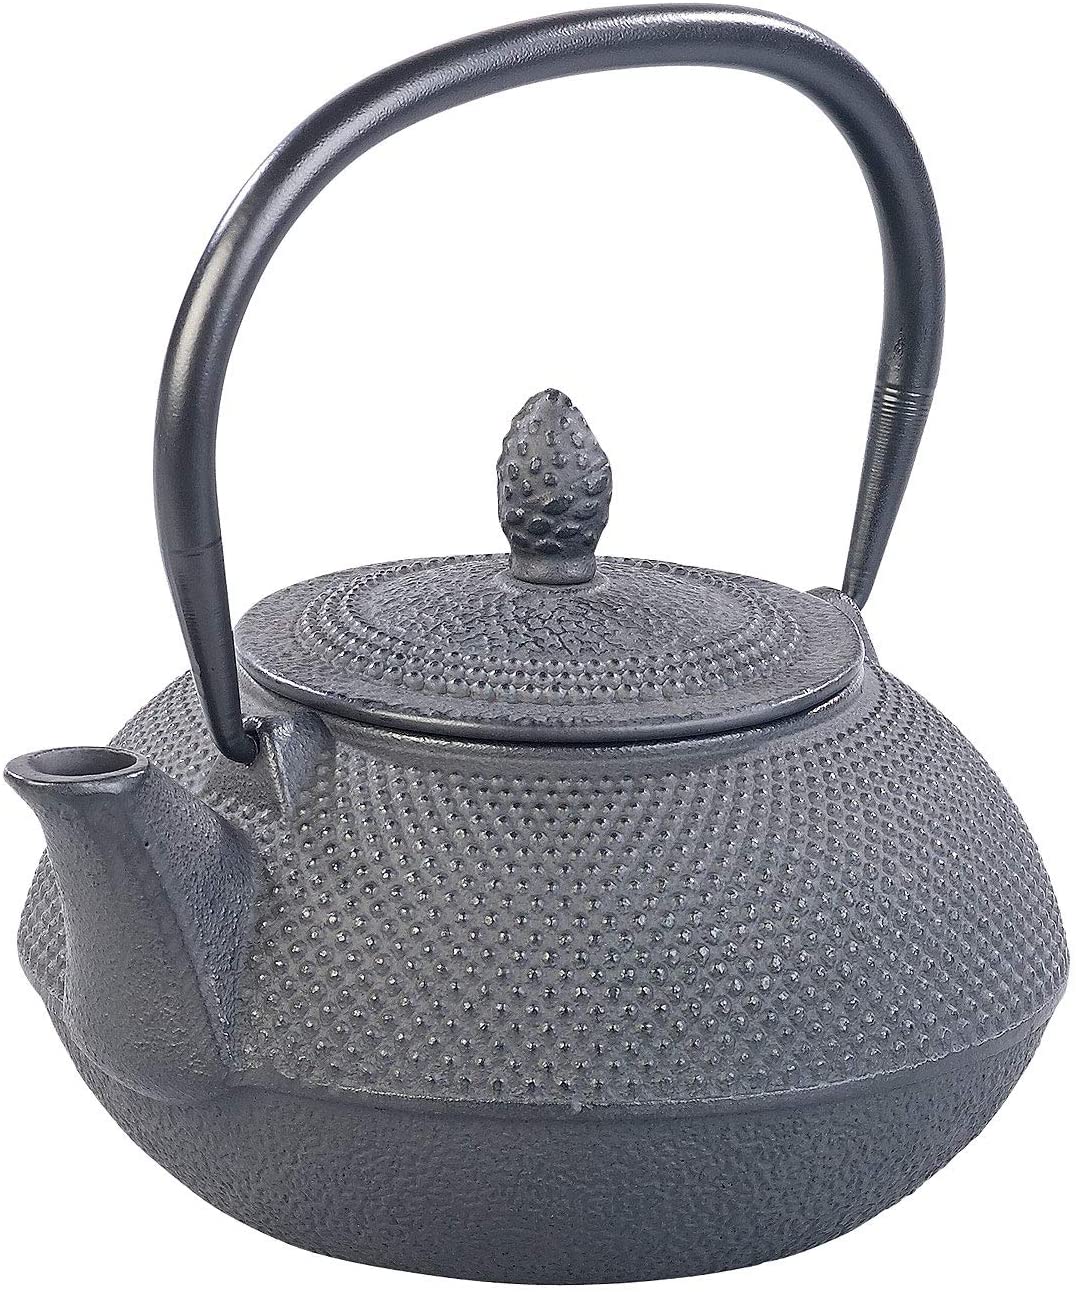 Rosenstein & Söhne Jug: Asian Cast Iron Teapot with Stainless Steel Strainer, 0.9 L, Black (Teapot Casting)